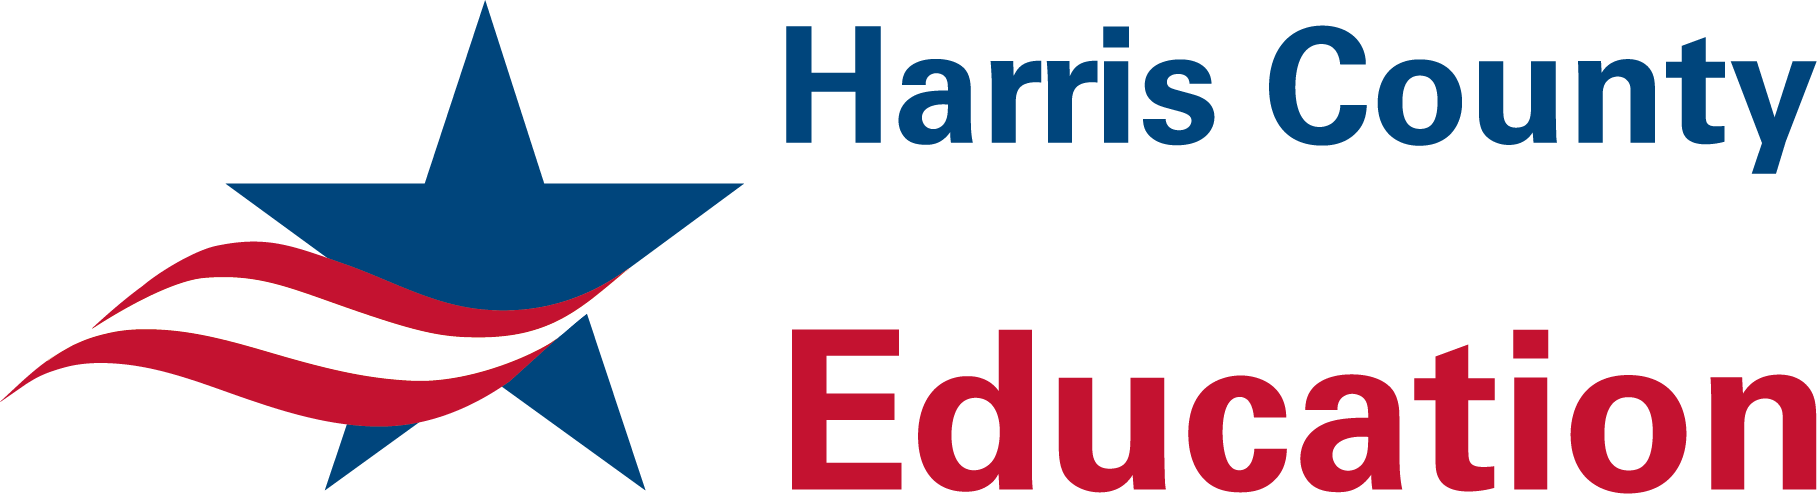 Harris County Department of Education logo